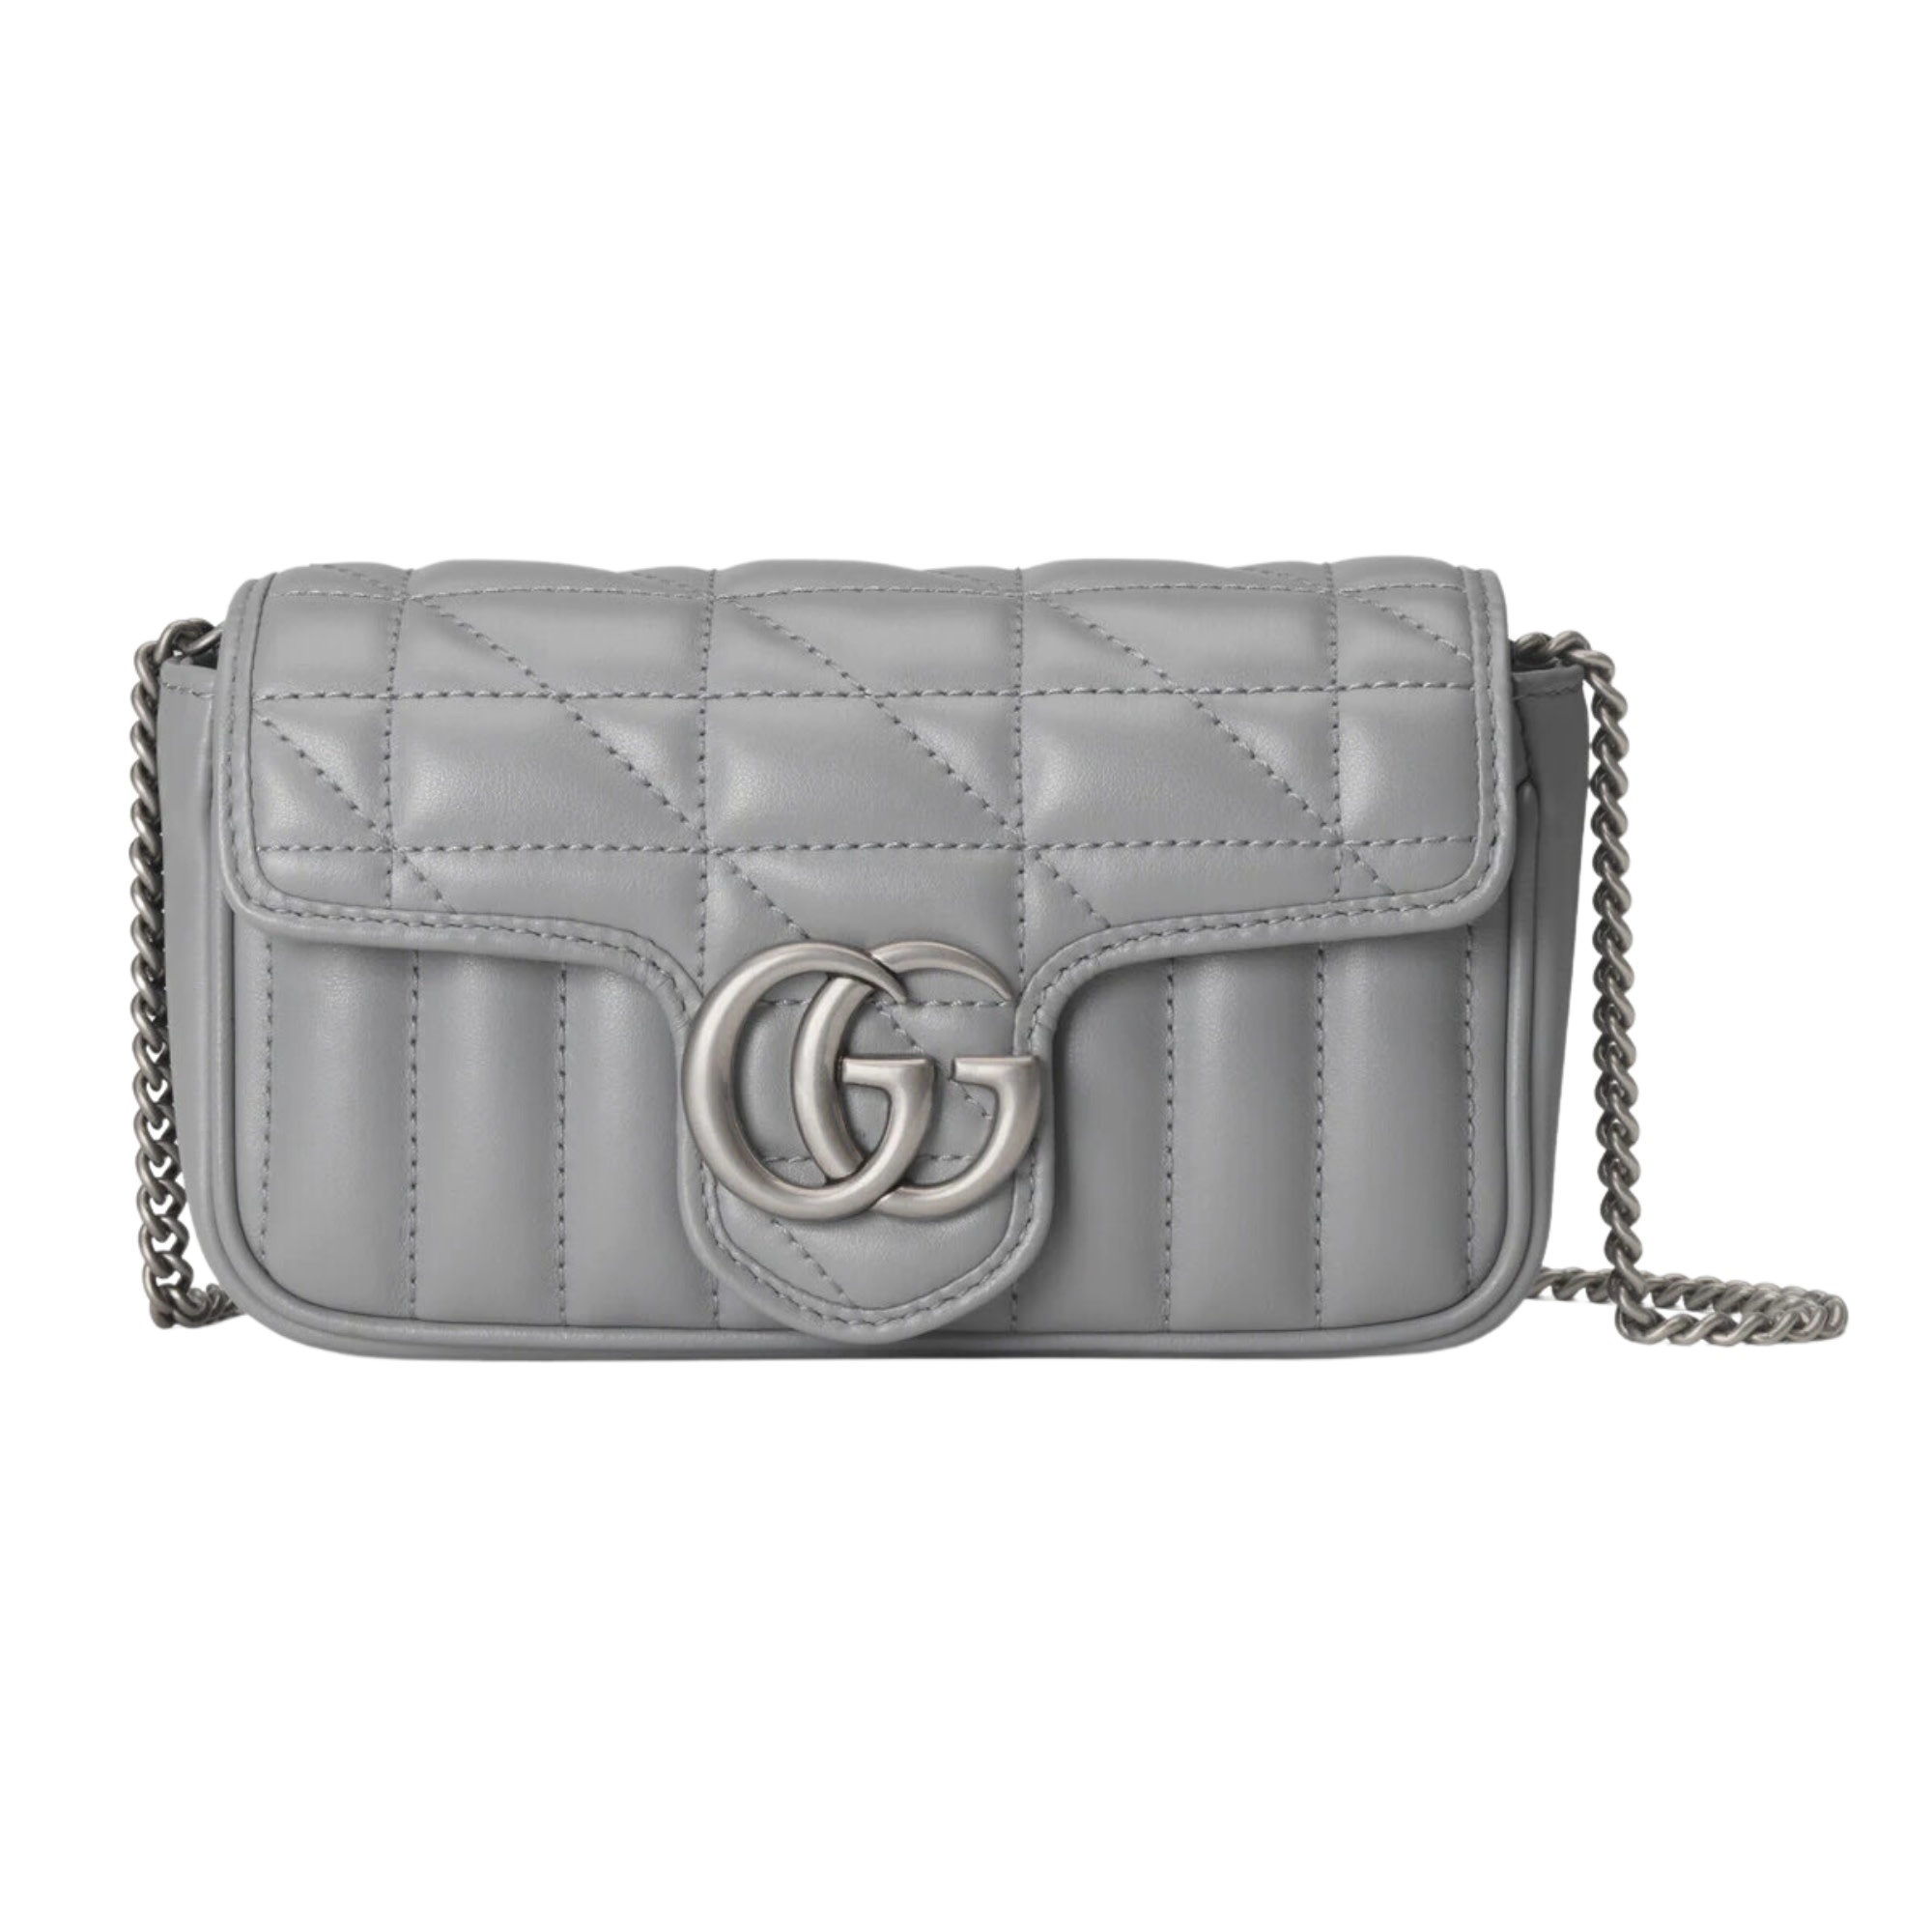 GG Matelassé small bag in dusty grey leather